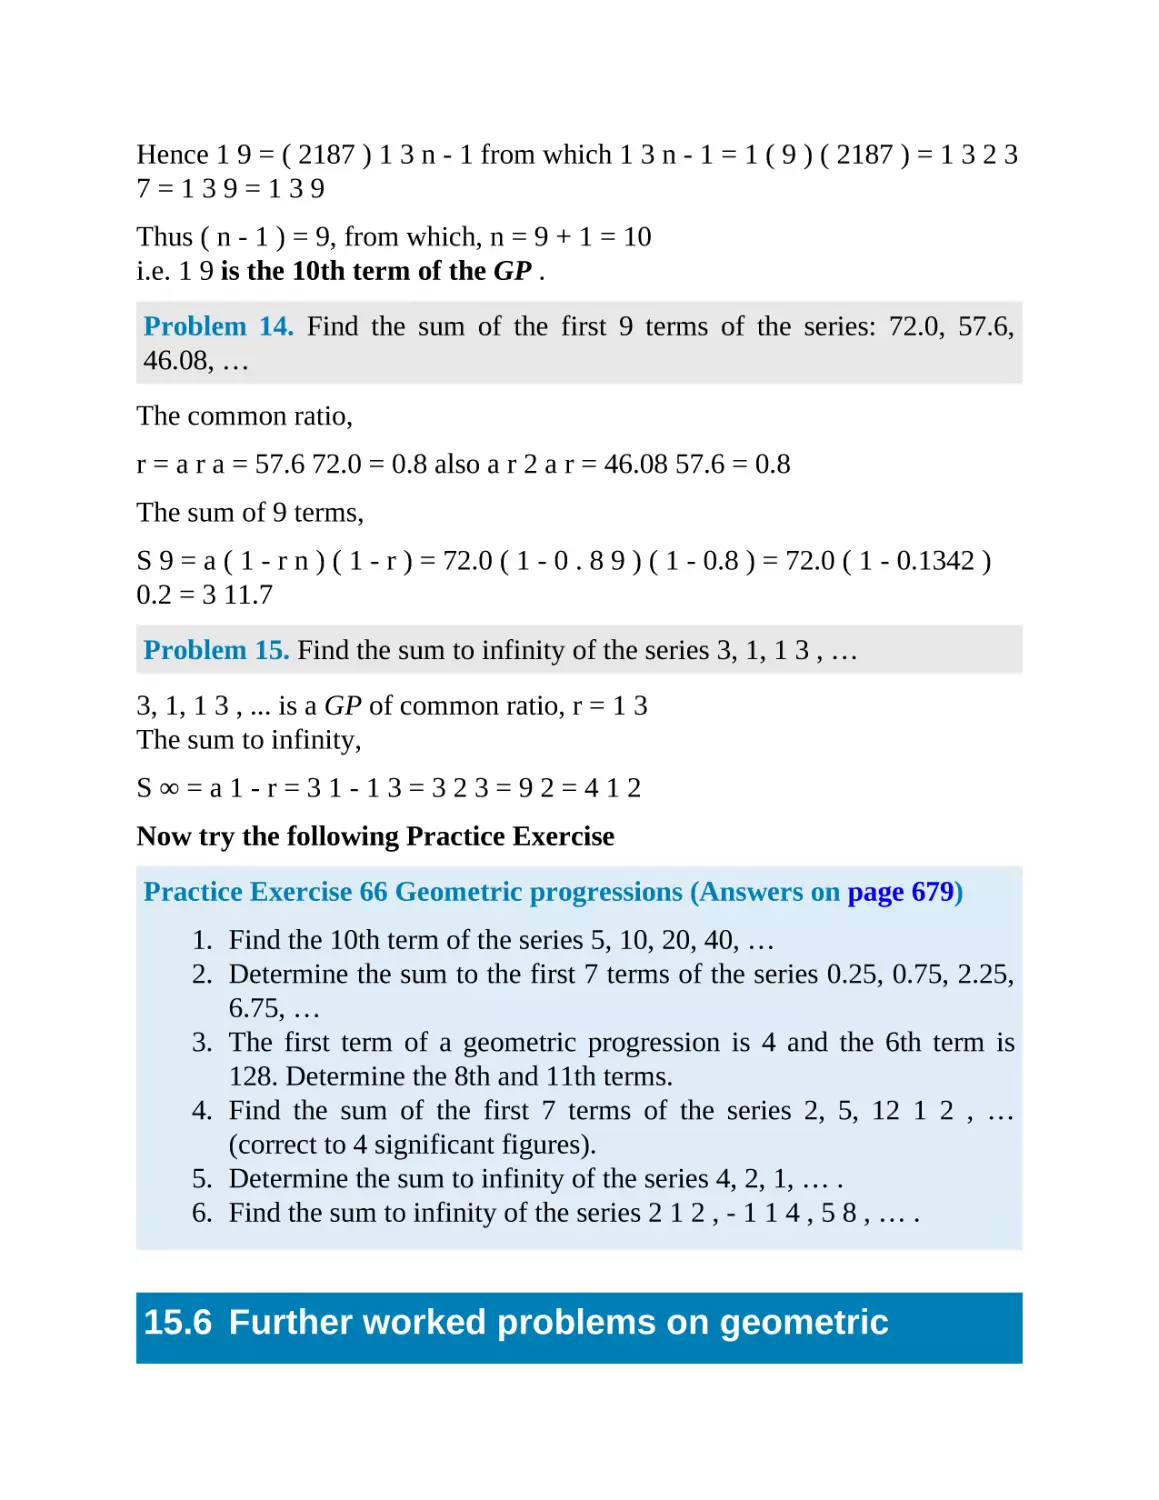 15.6 Further worked problems on geometric progressions